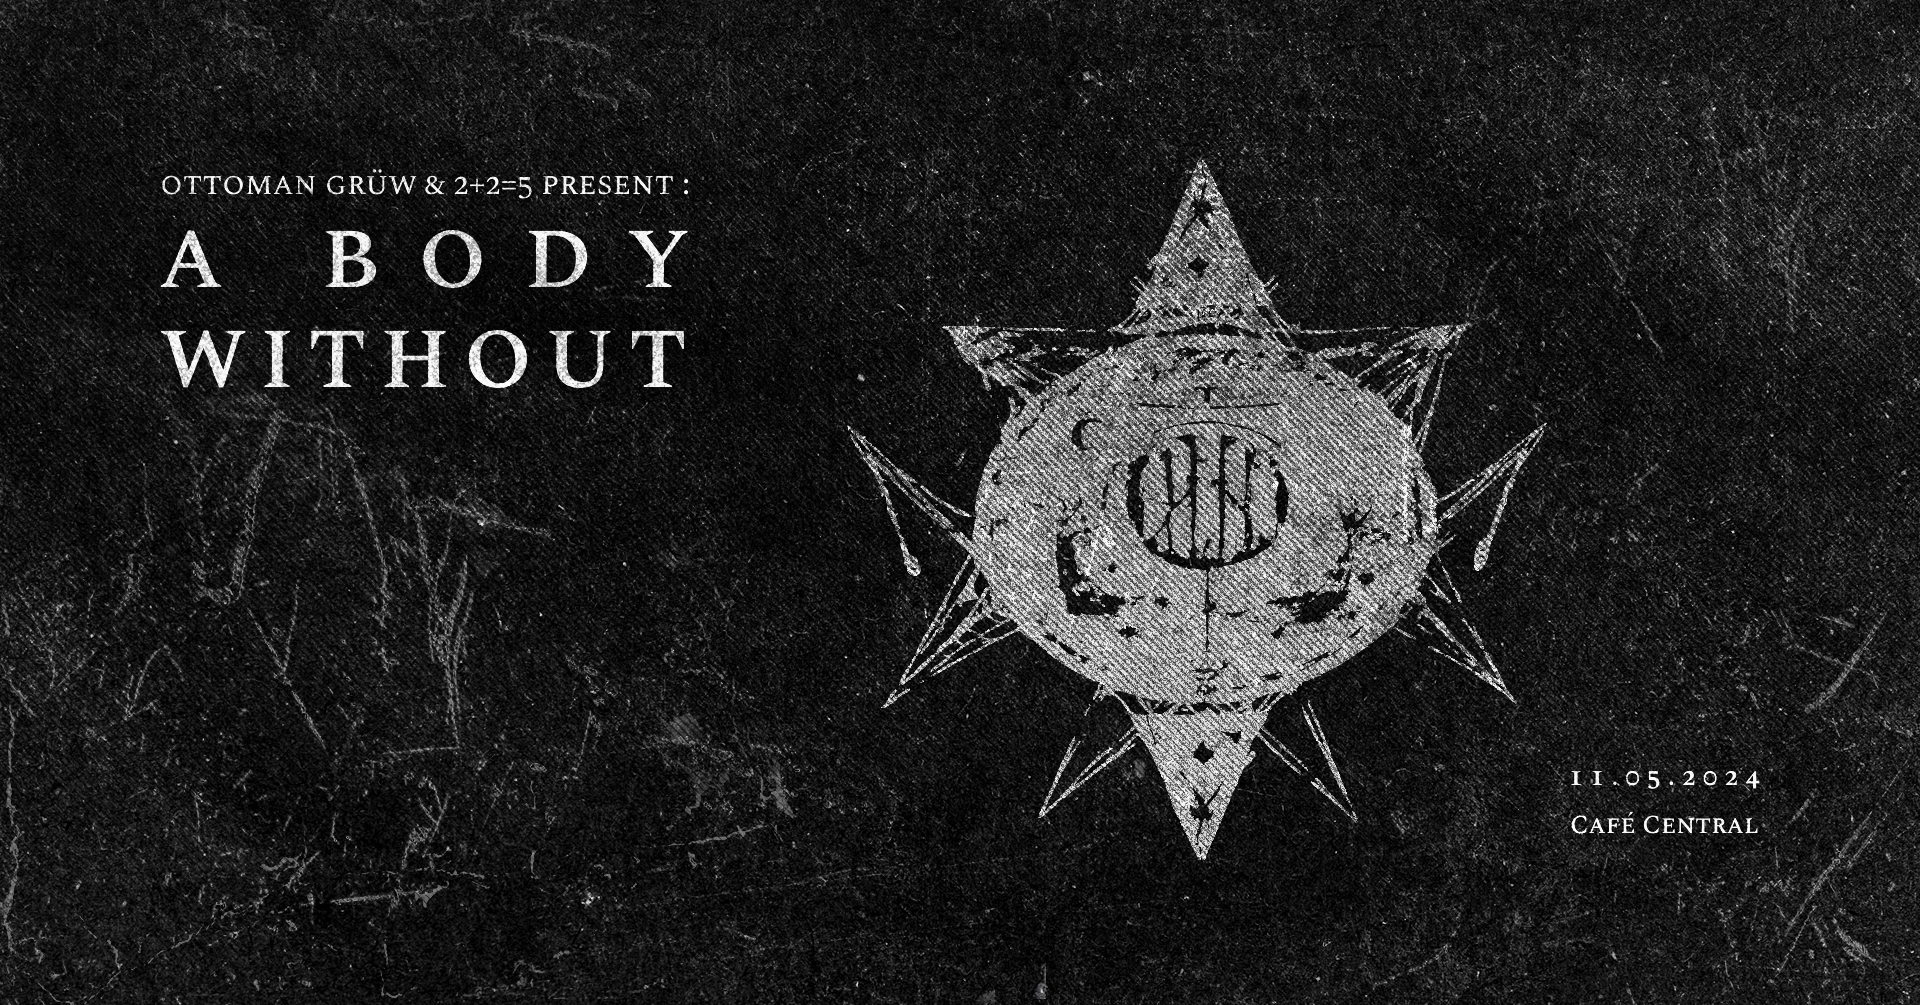 A BODY WITHOUT - PROJECT LAUNCH by Ottoman Grüw & 2+2=5 [Techno - EBM - Industrial - Post-Punk] - フライヤー表